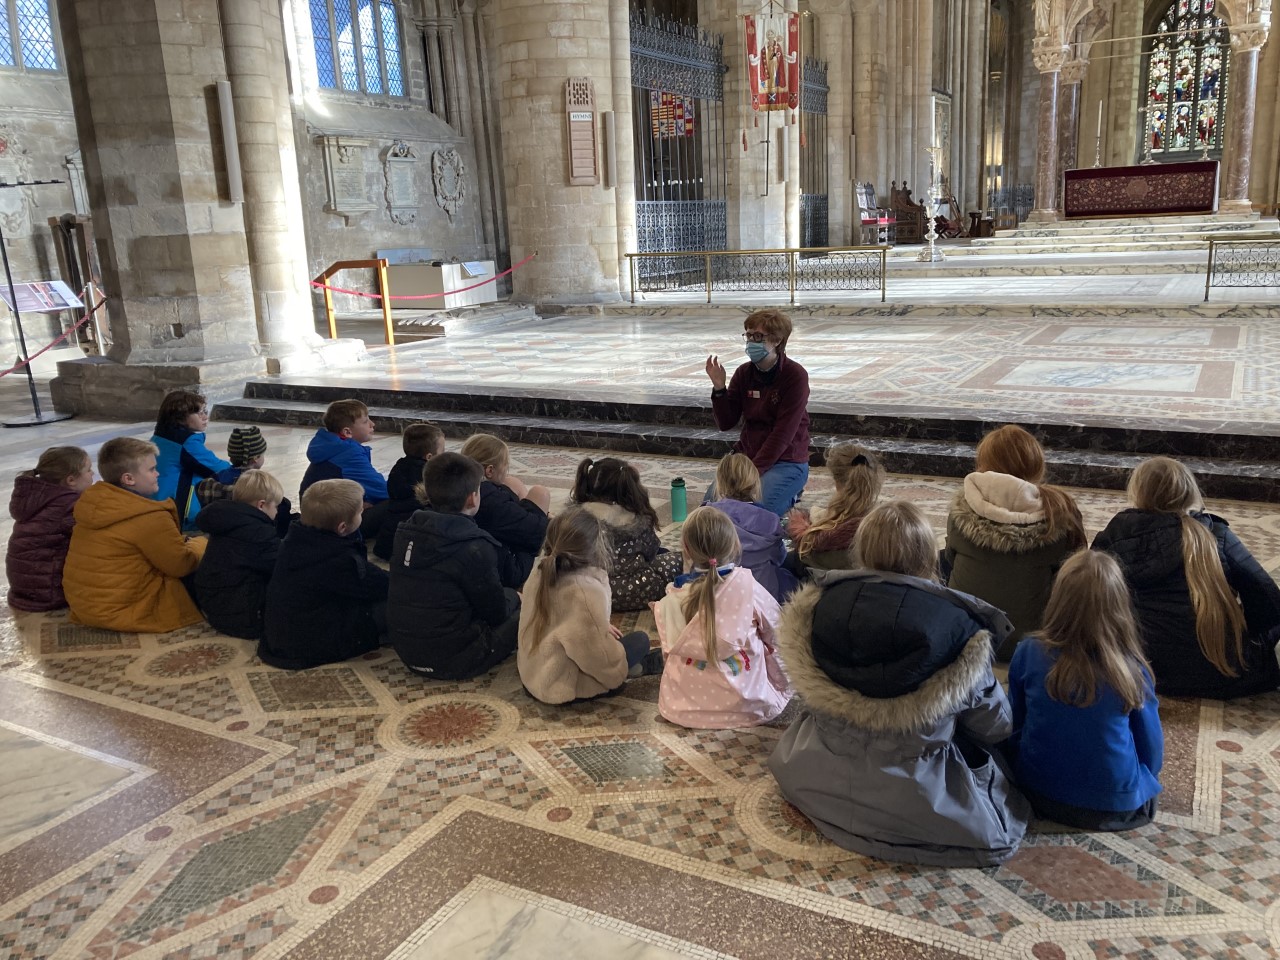 Children sat in the Cathedral learning